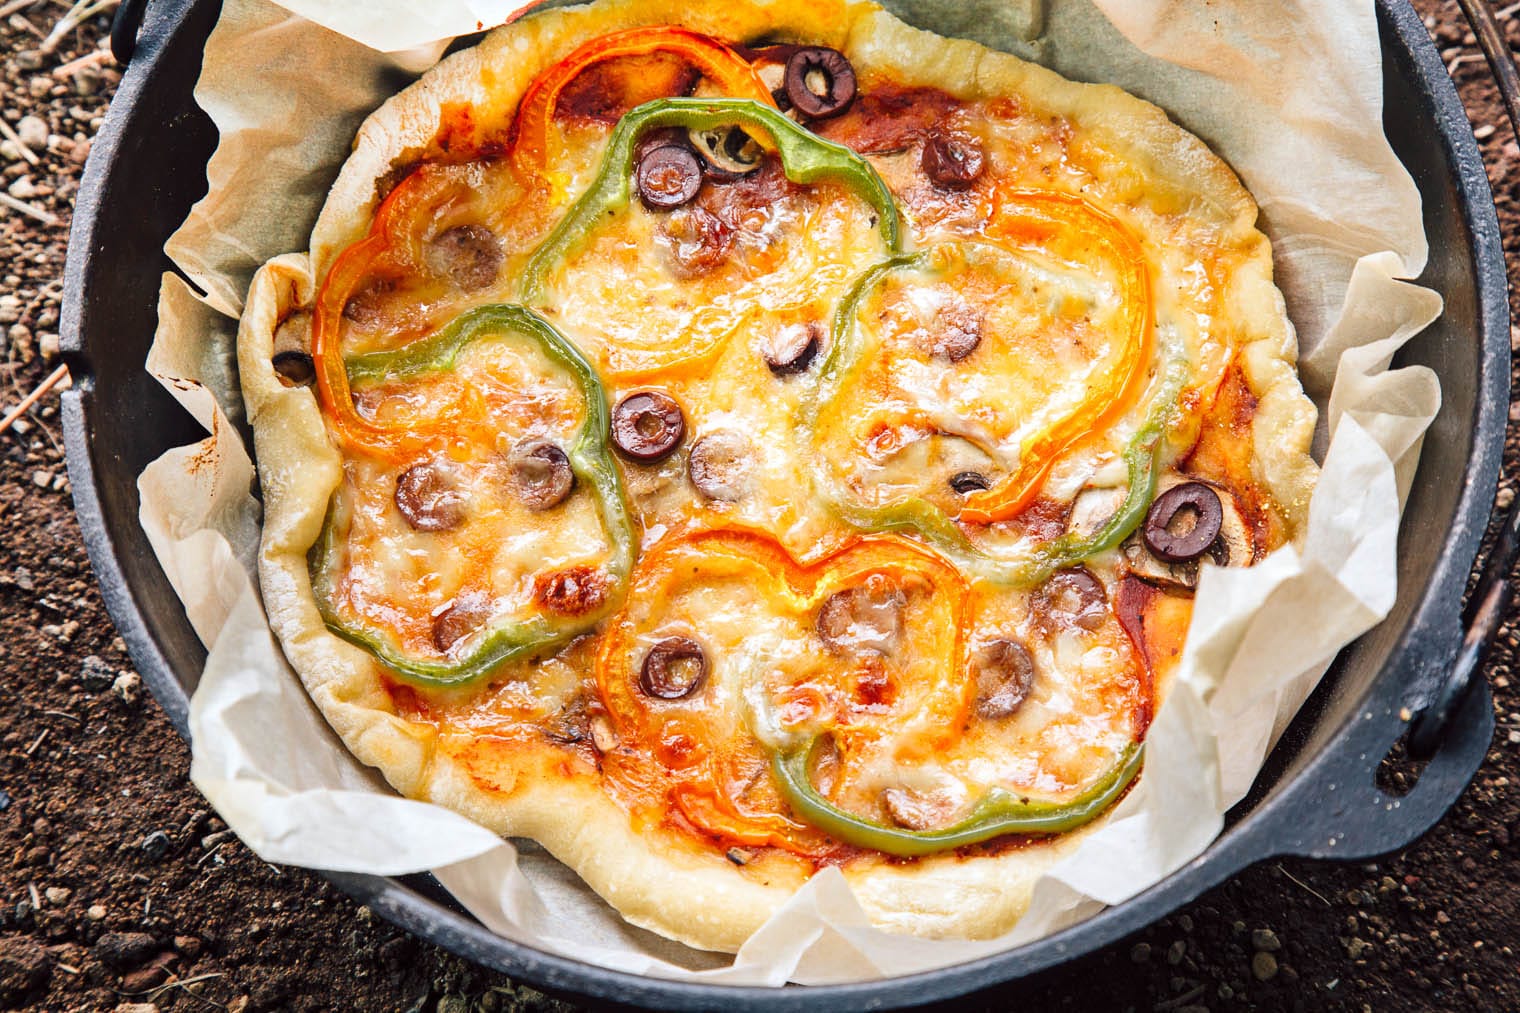 Make pizza night a new camping tradition! Learn how to make Dutch Oven Pizza while camping using just a few simple ingredients.